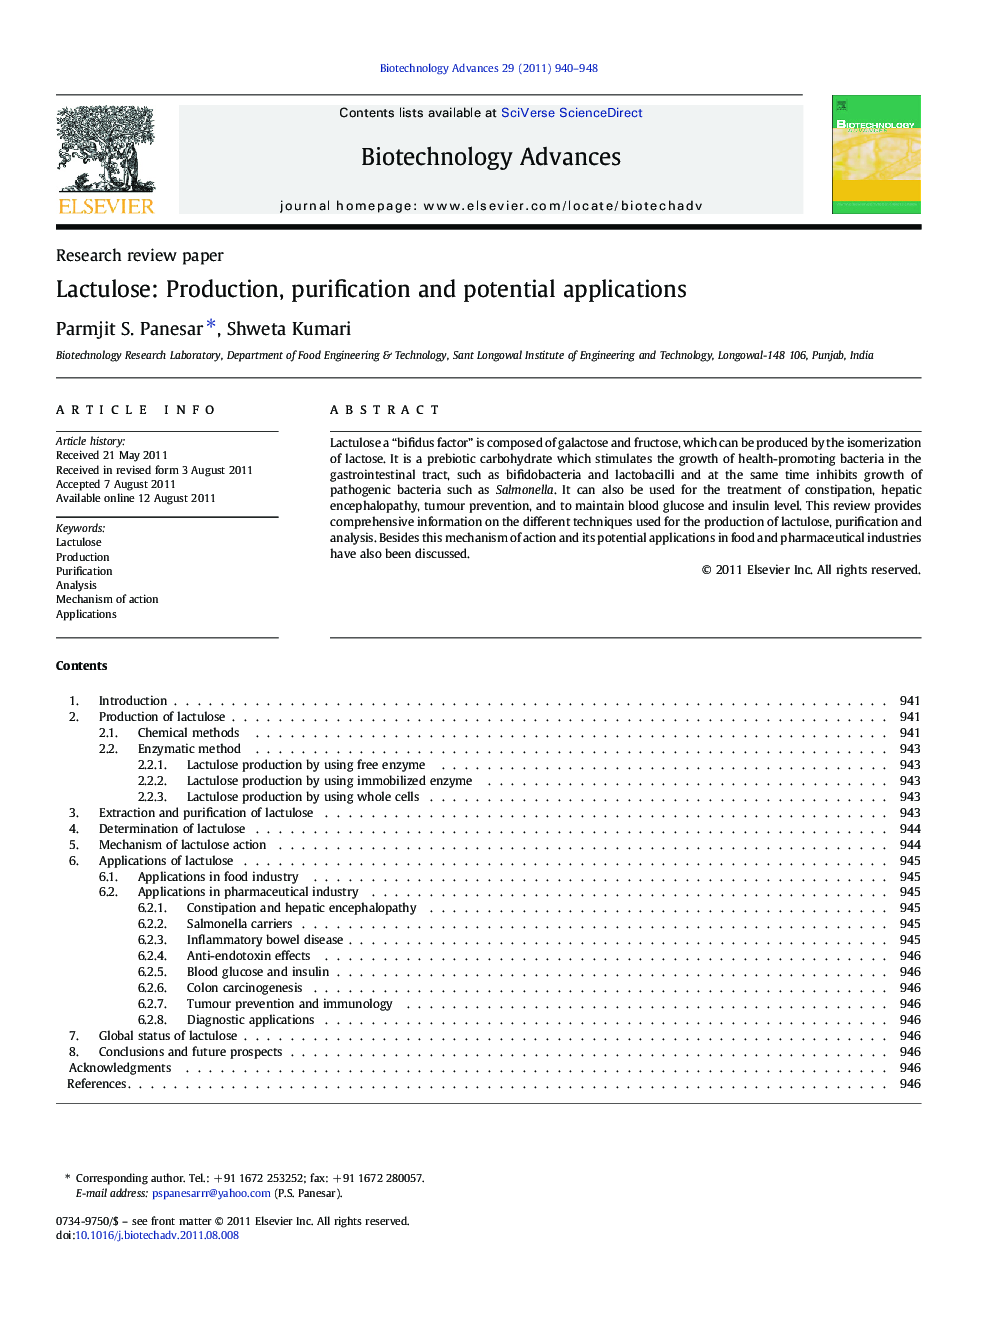 Lactulose: Production, purification and potential applications